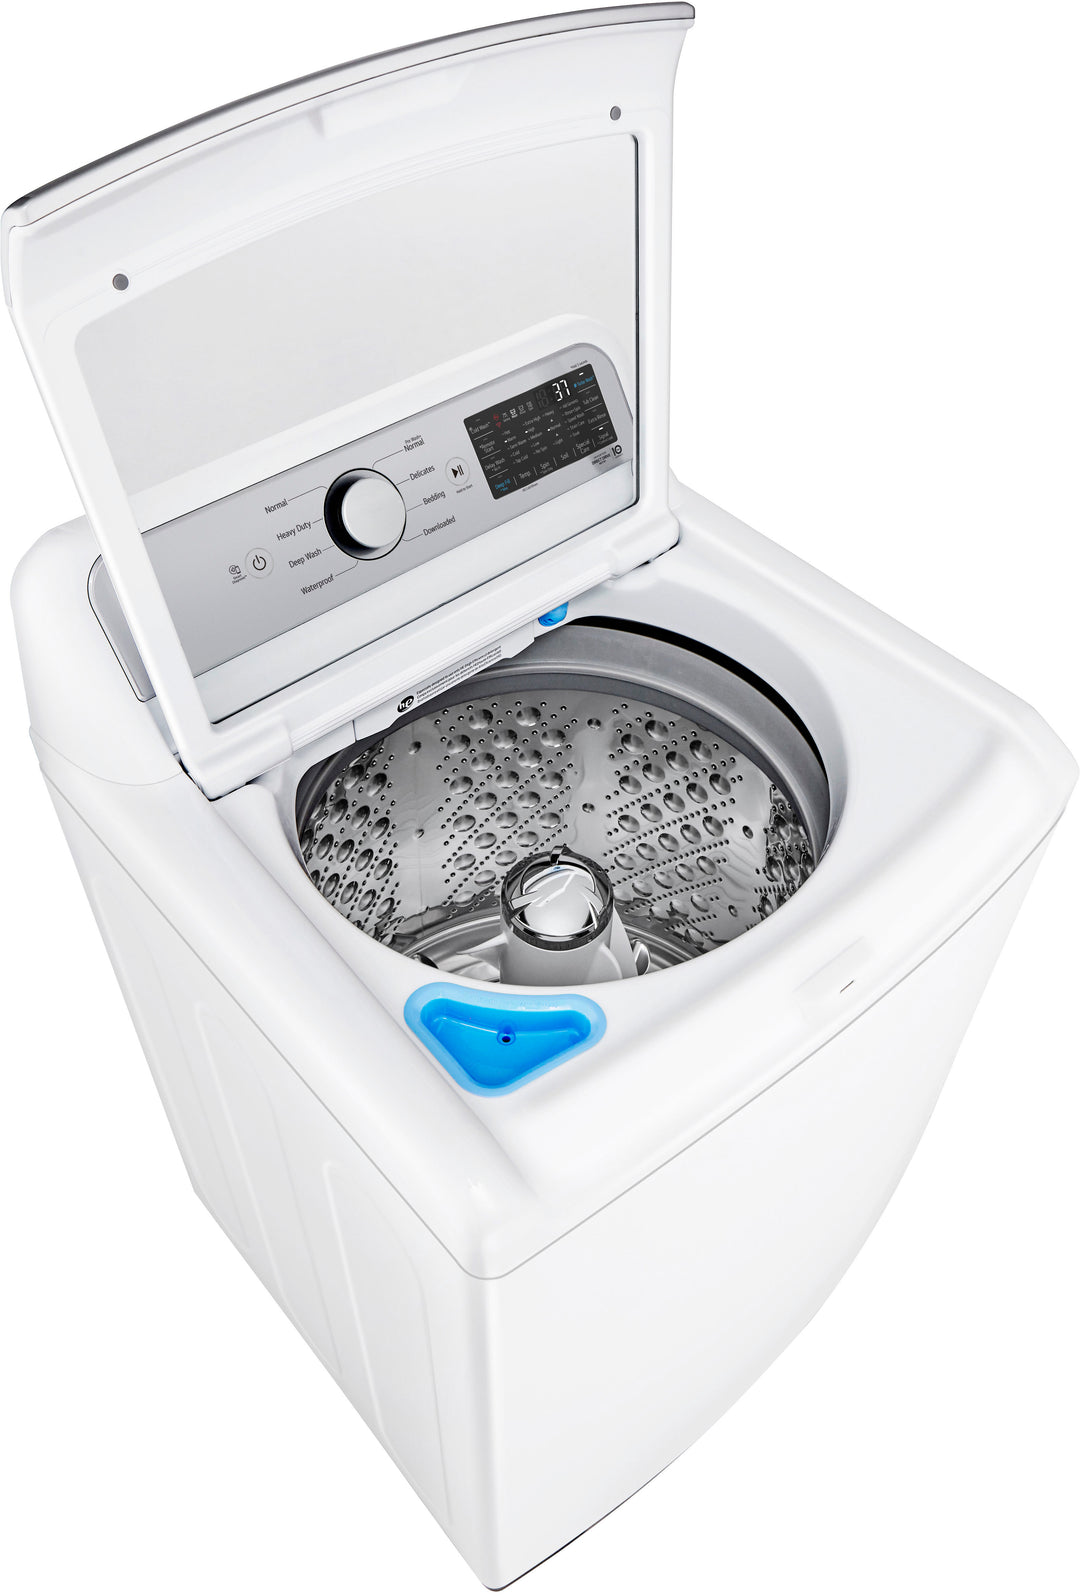 LG - 5.3 Cu. Ft. High-Efficiency Smart Top Load Washer with 4-Way Agitator and TurboWash3D - White_9